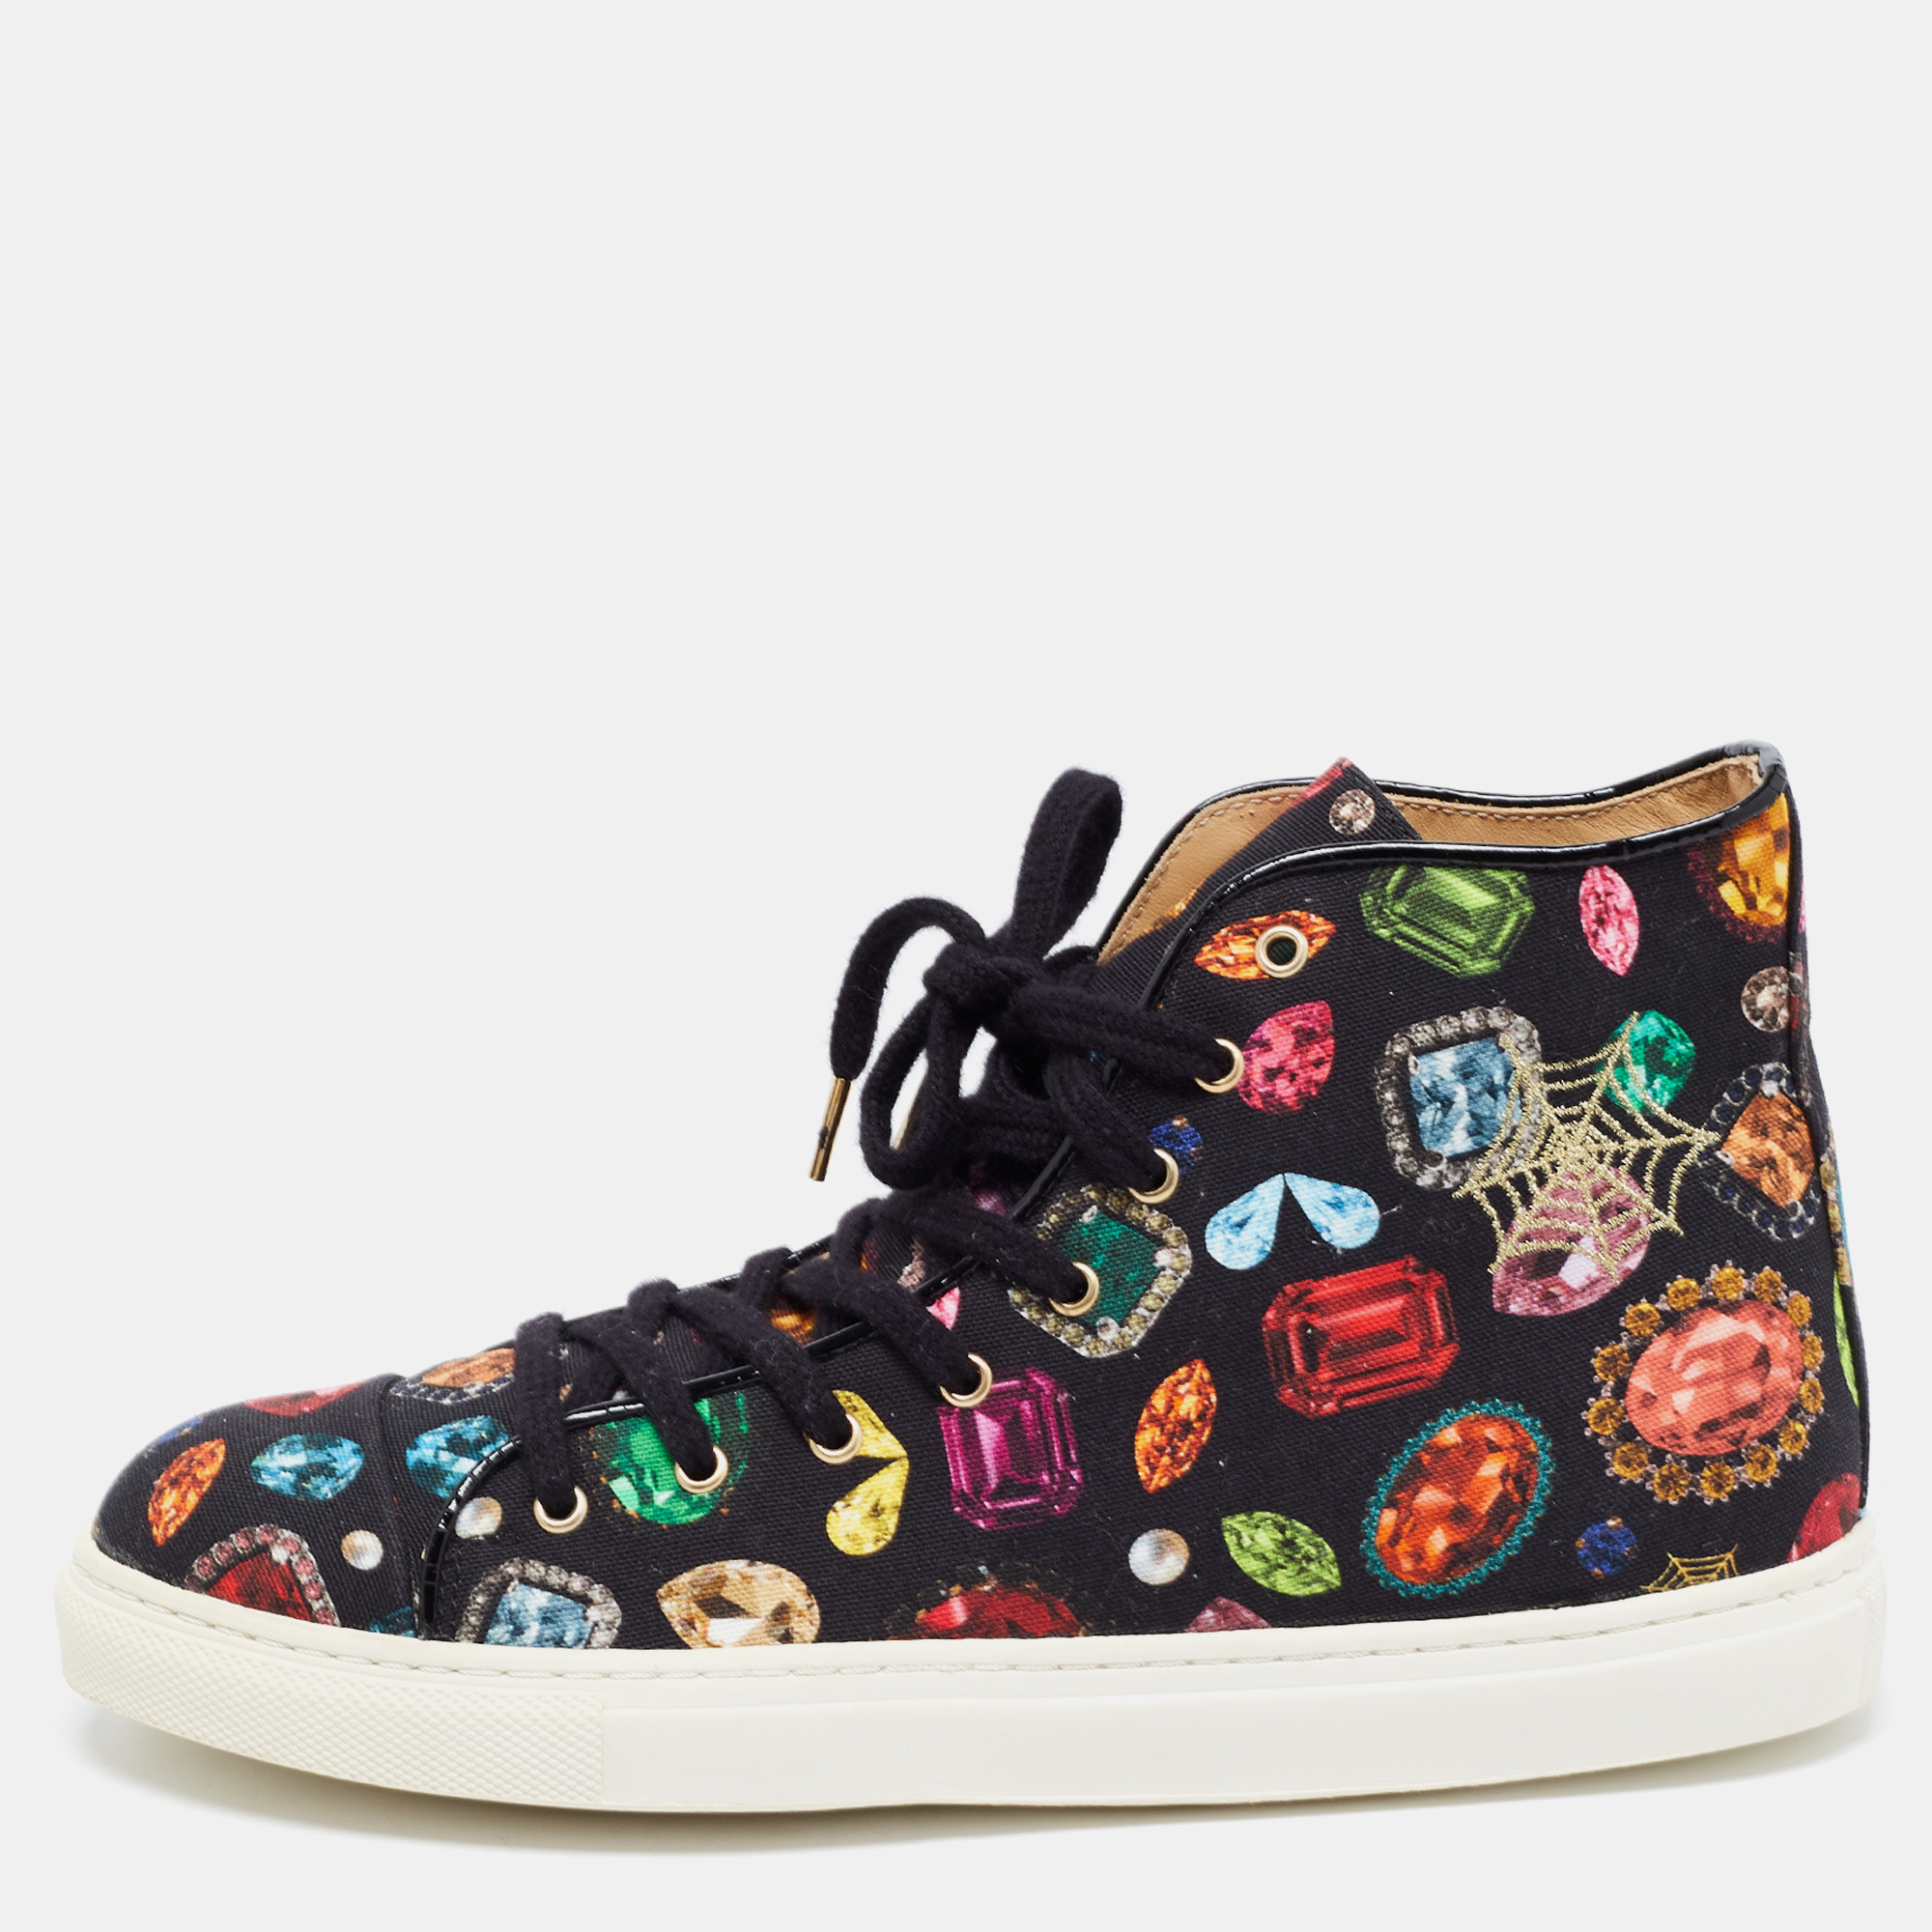 Charlotte Olympia Multicolor Jewel Print Canvas High Top Sneakers Size 36.5